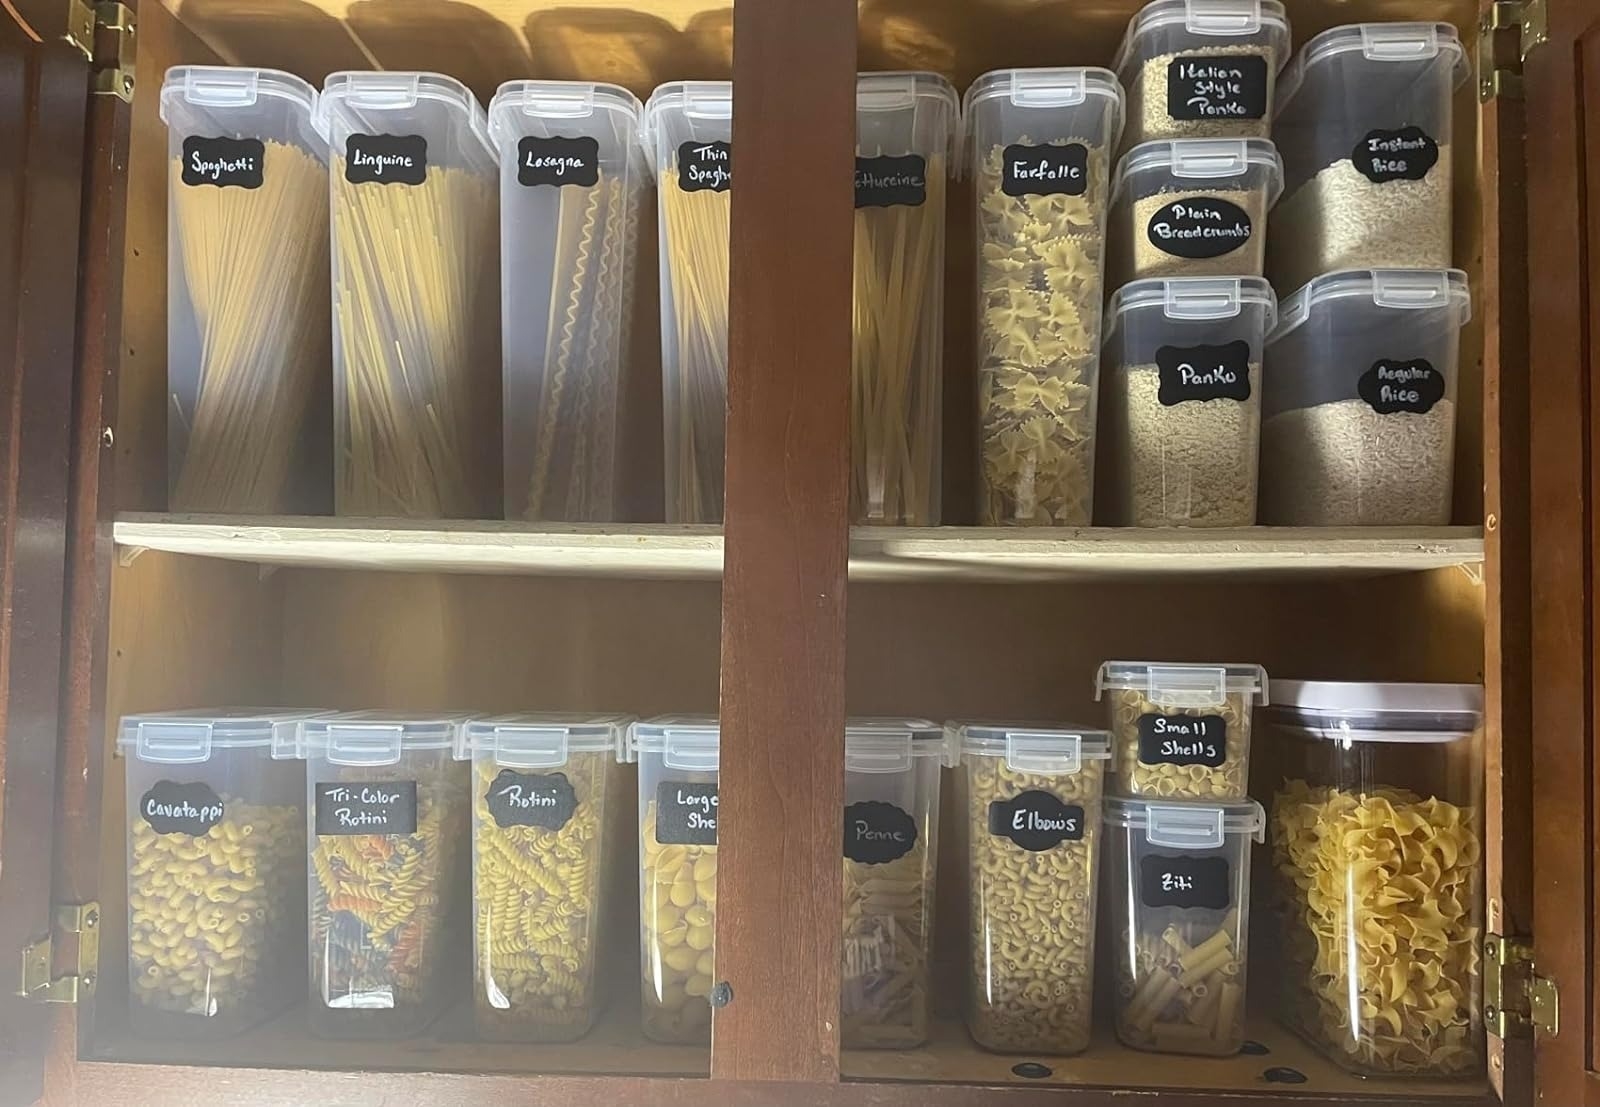 Organized pantry shelves with labeled containers for various pasta and grains